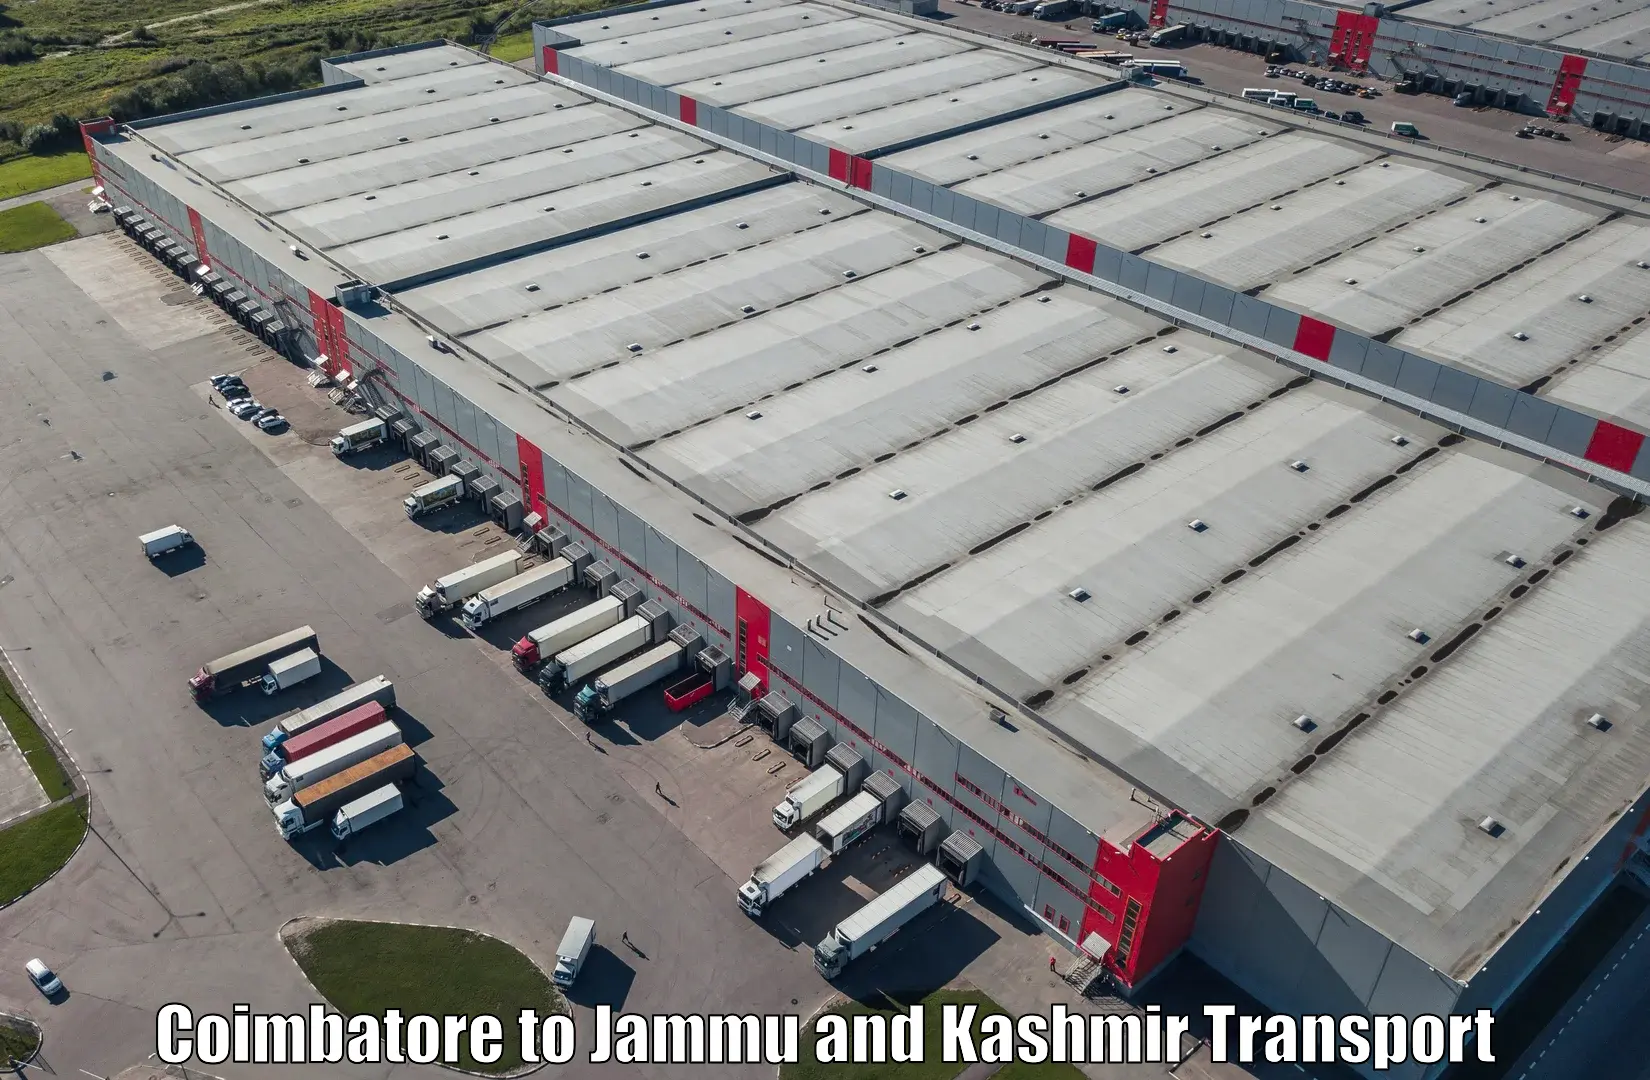 Goods delivery service Coimbatore to Jammu and Kashmir